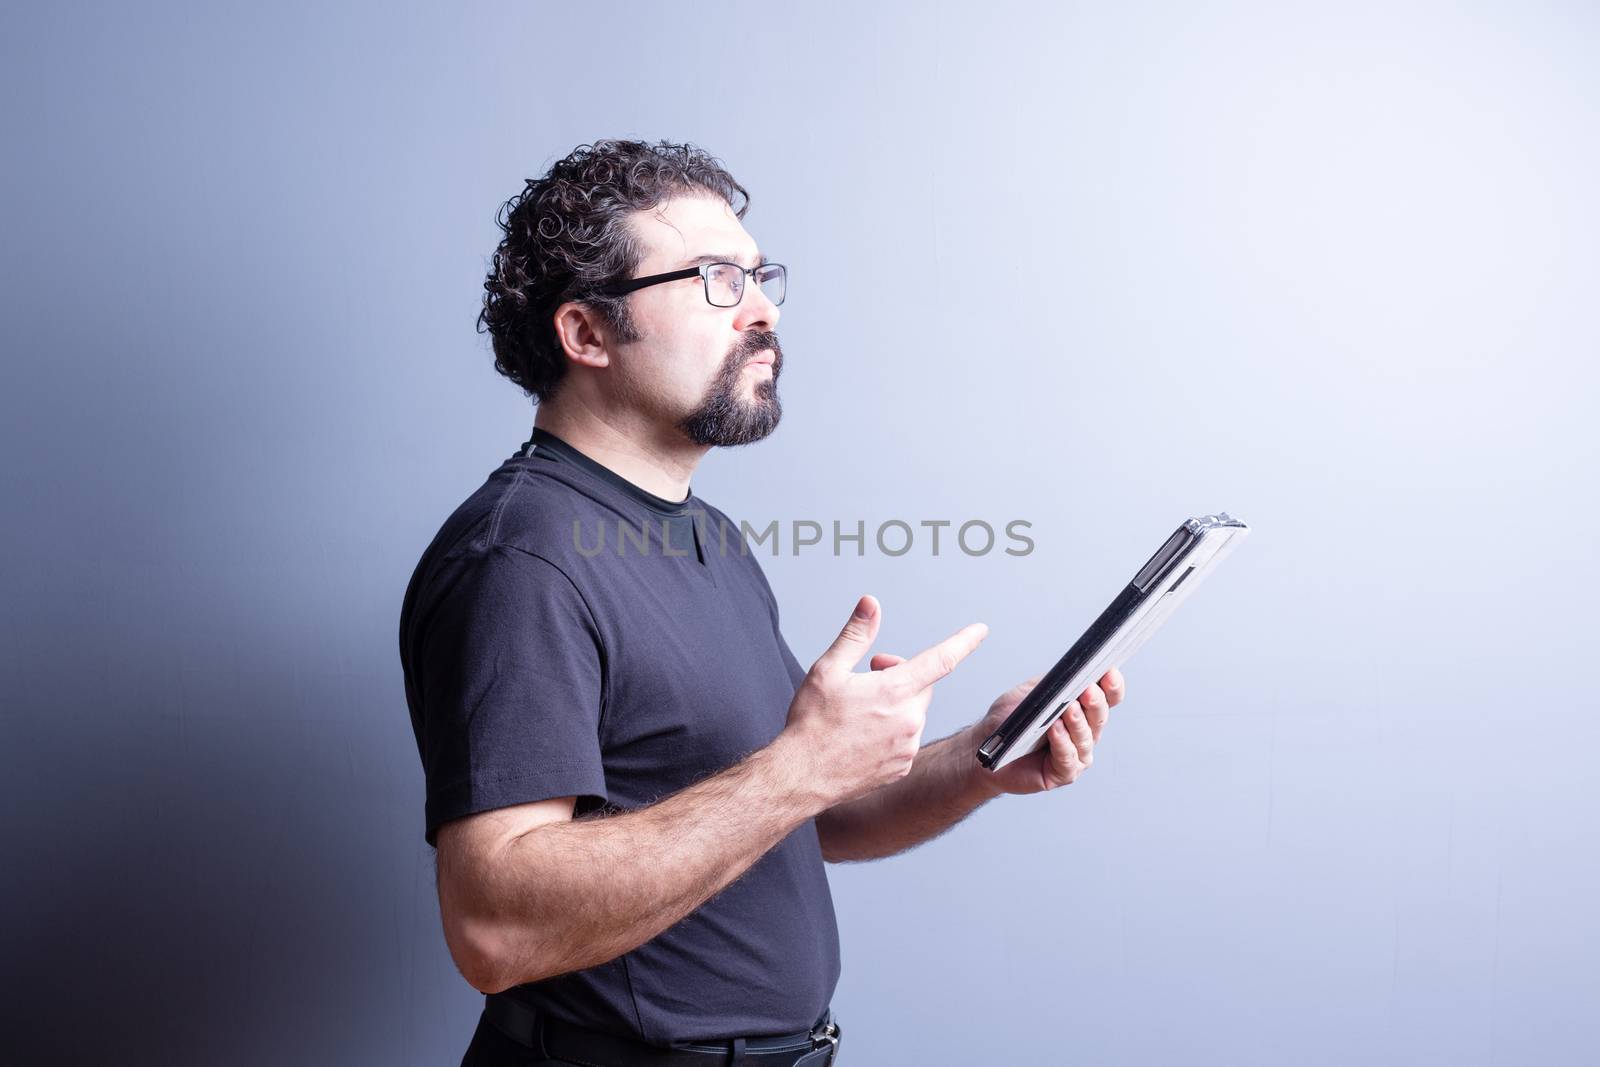 Profile of Man Wearing T-Shirt and Eyeglasses Deep in Thought While Holding Computer Tablet in Studio with Gray Background, Side Lighting and Copy Space